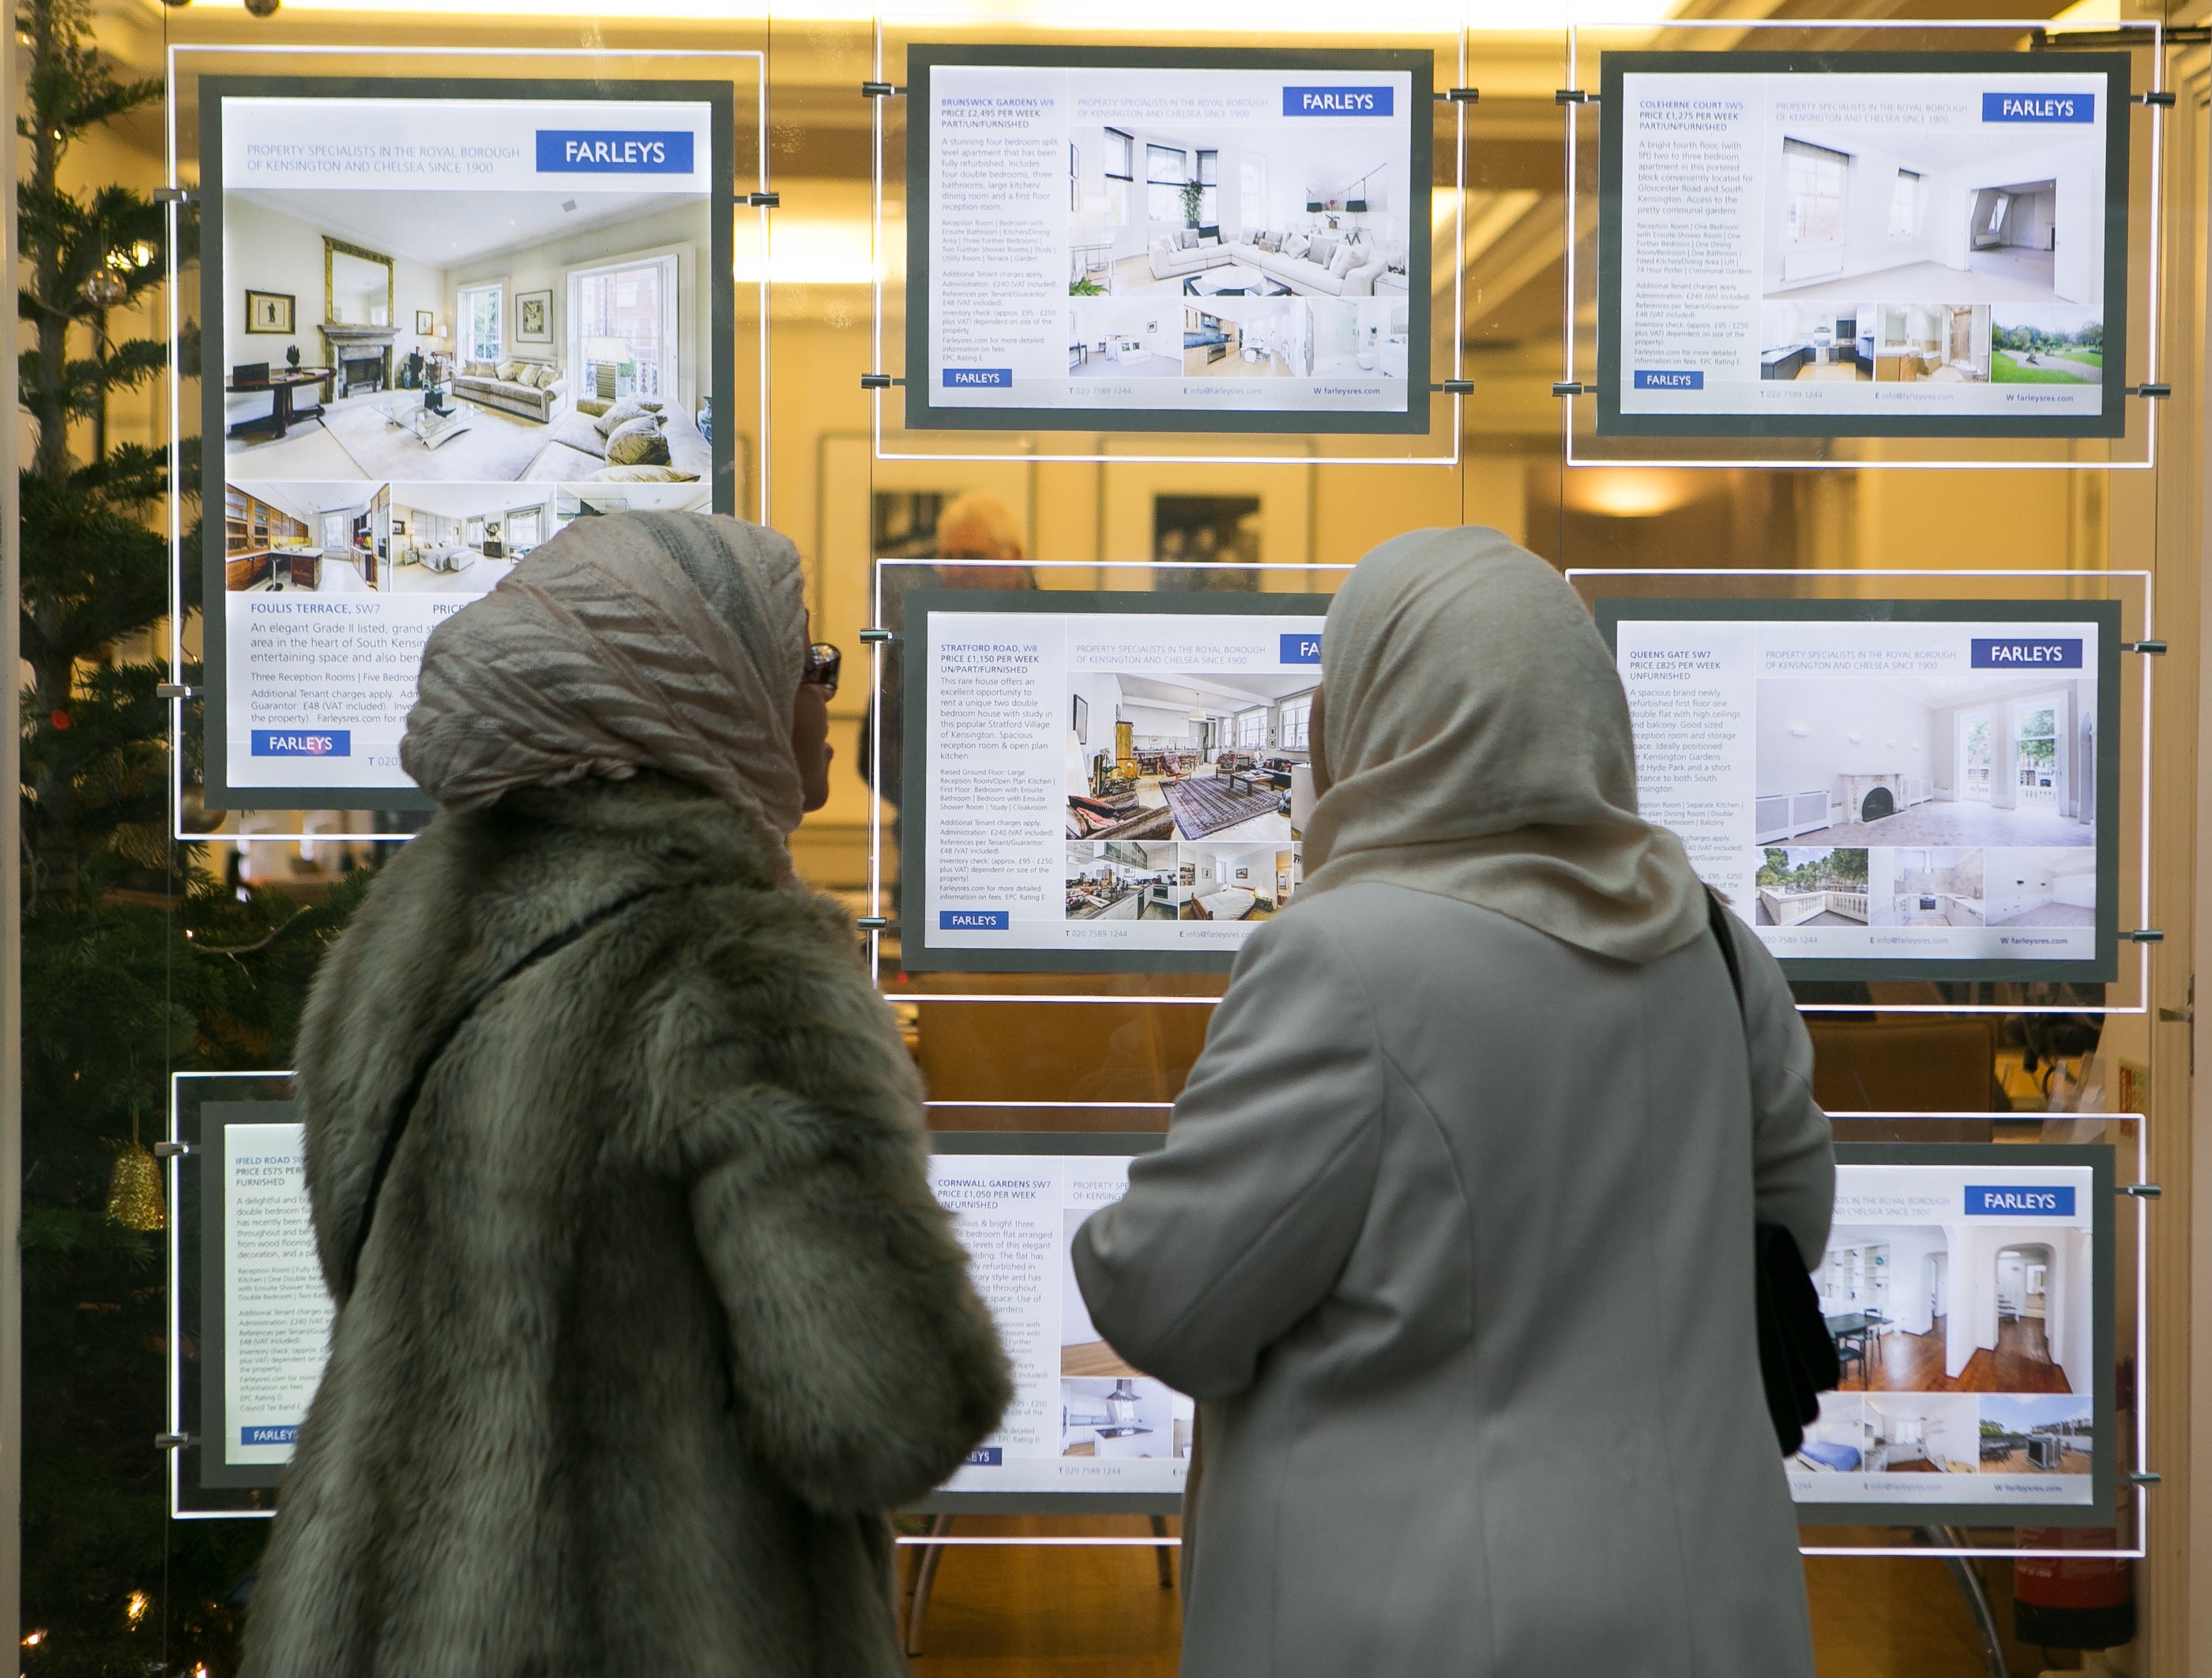 The average price of a UK home has topped £250,000 for the first time, but the proportion of sellers applying discounts to properties is increasing, according to Zoopla (Daniel Leal-Olivas/PA)